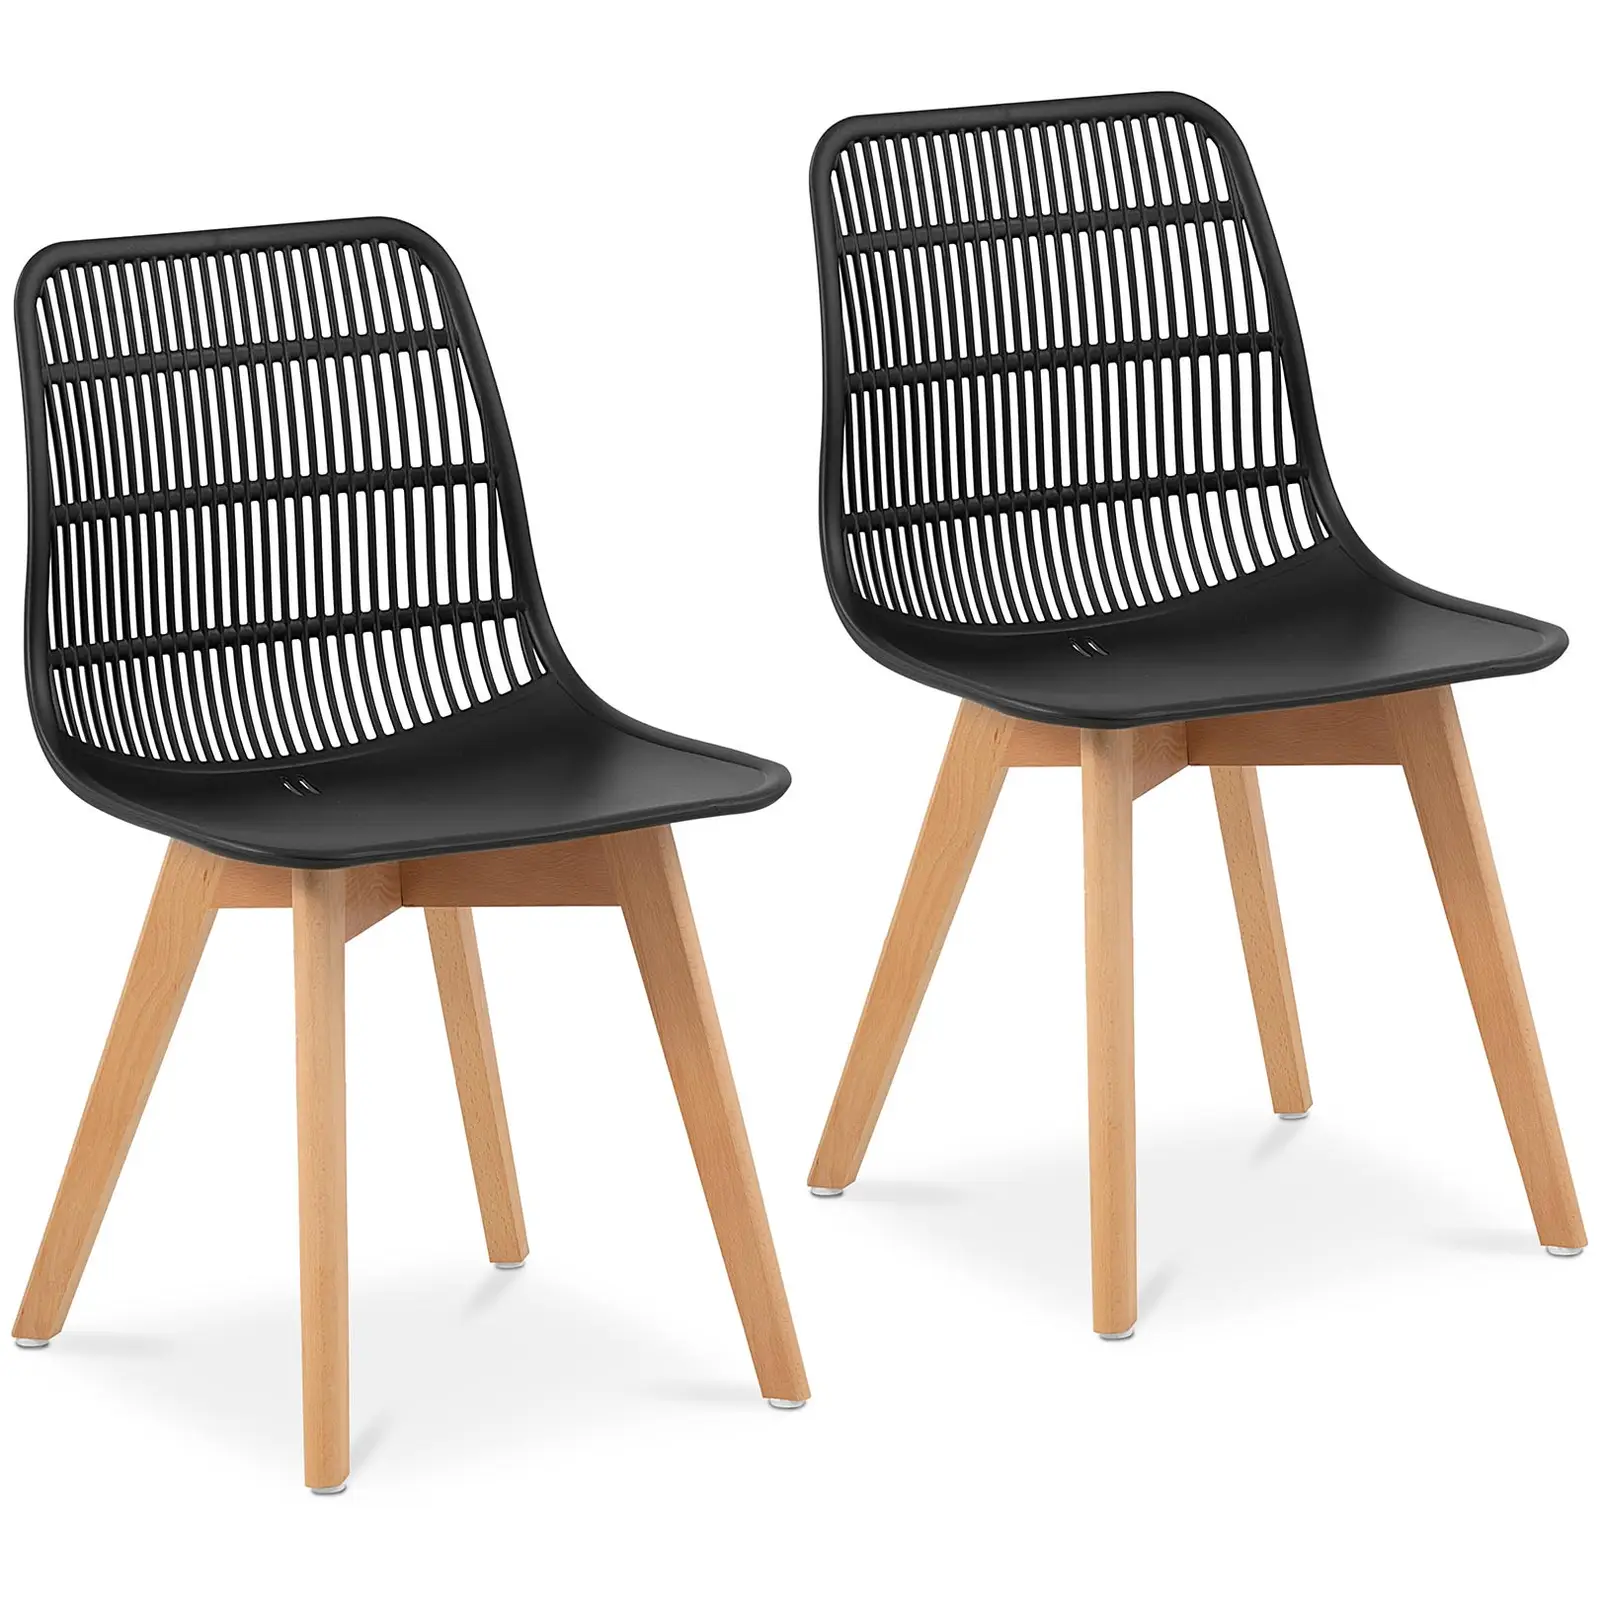 Chair - set of 2 - up to 150 kg - seat area 460x460x450 mm - {{colour_34_old_temp}}